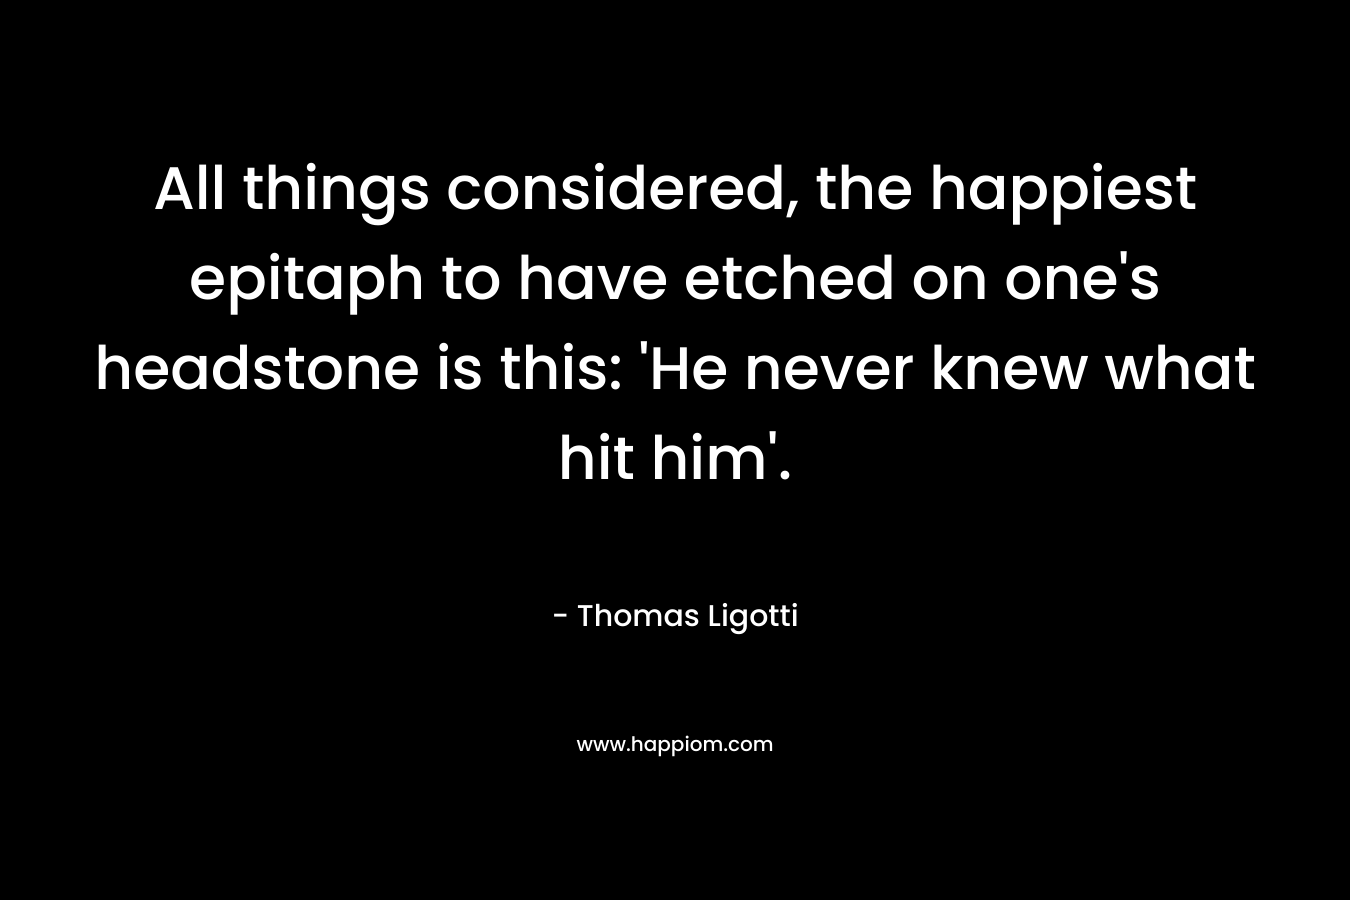 All things considered, the happiest epitaph to have etched on one’s headstone is this: ‘He never knew what hit him’. – Thomas Ligotti